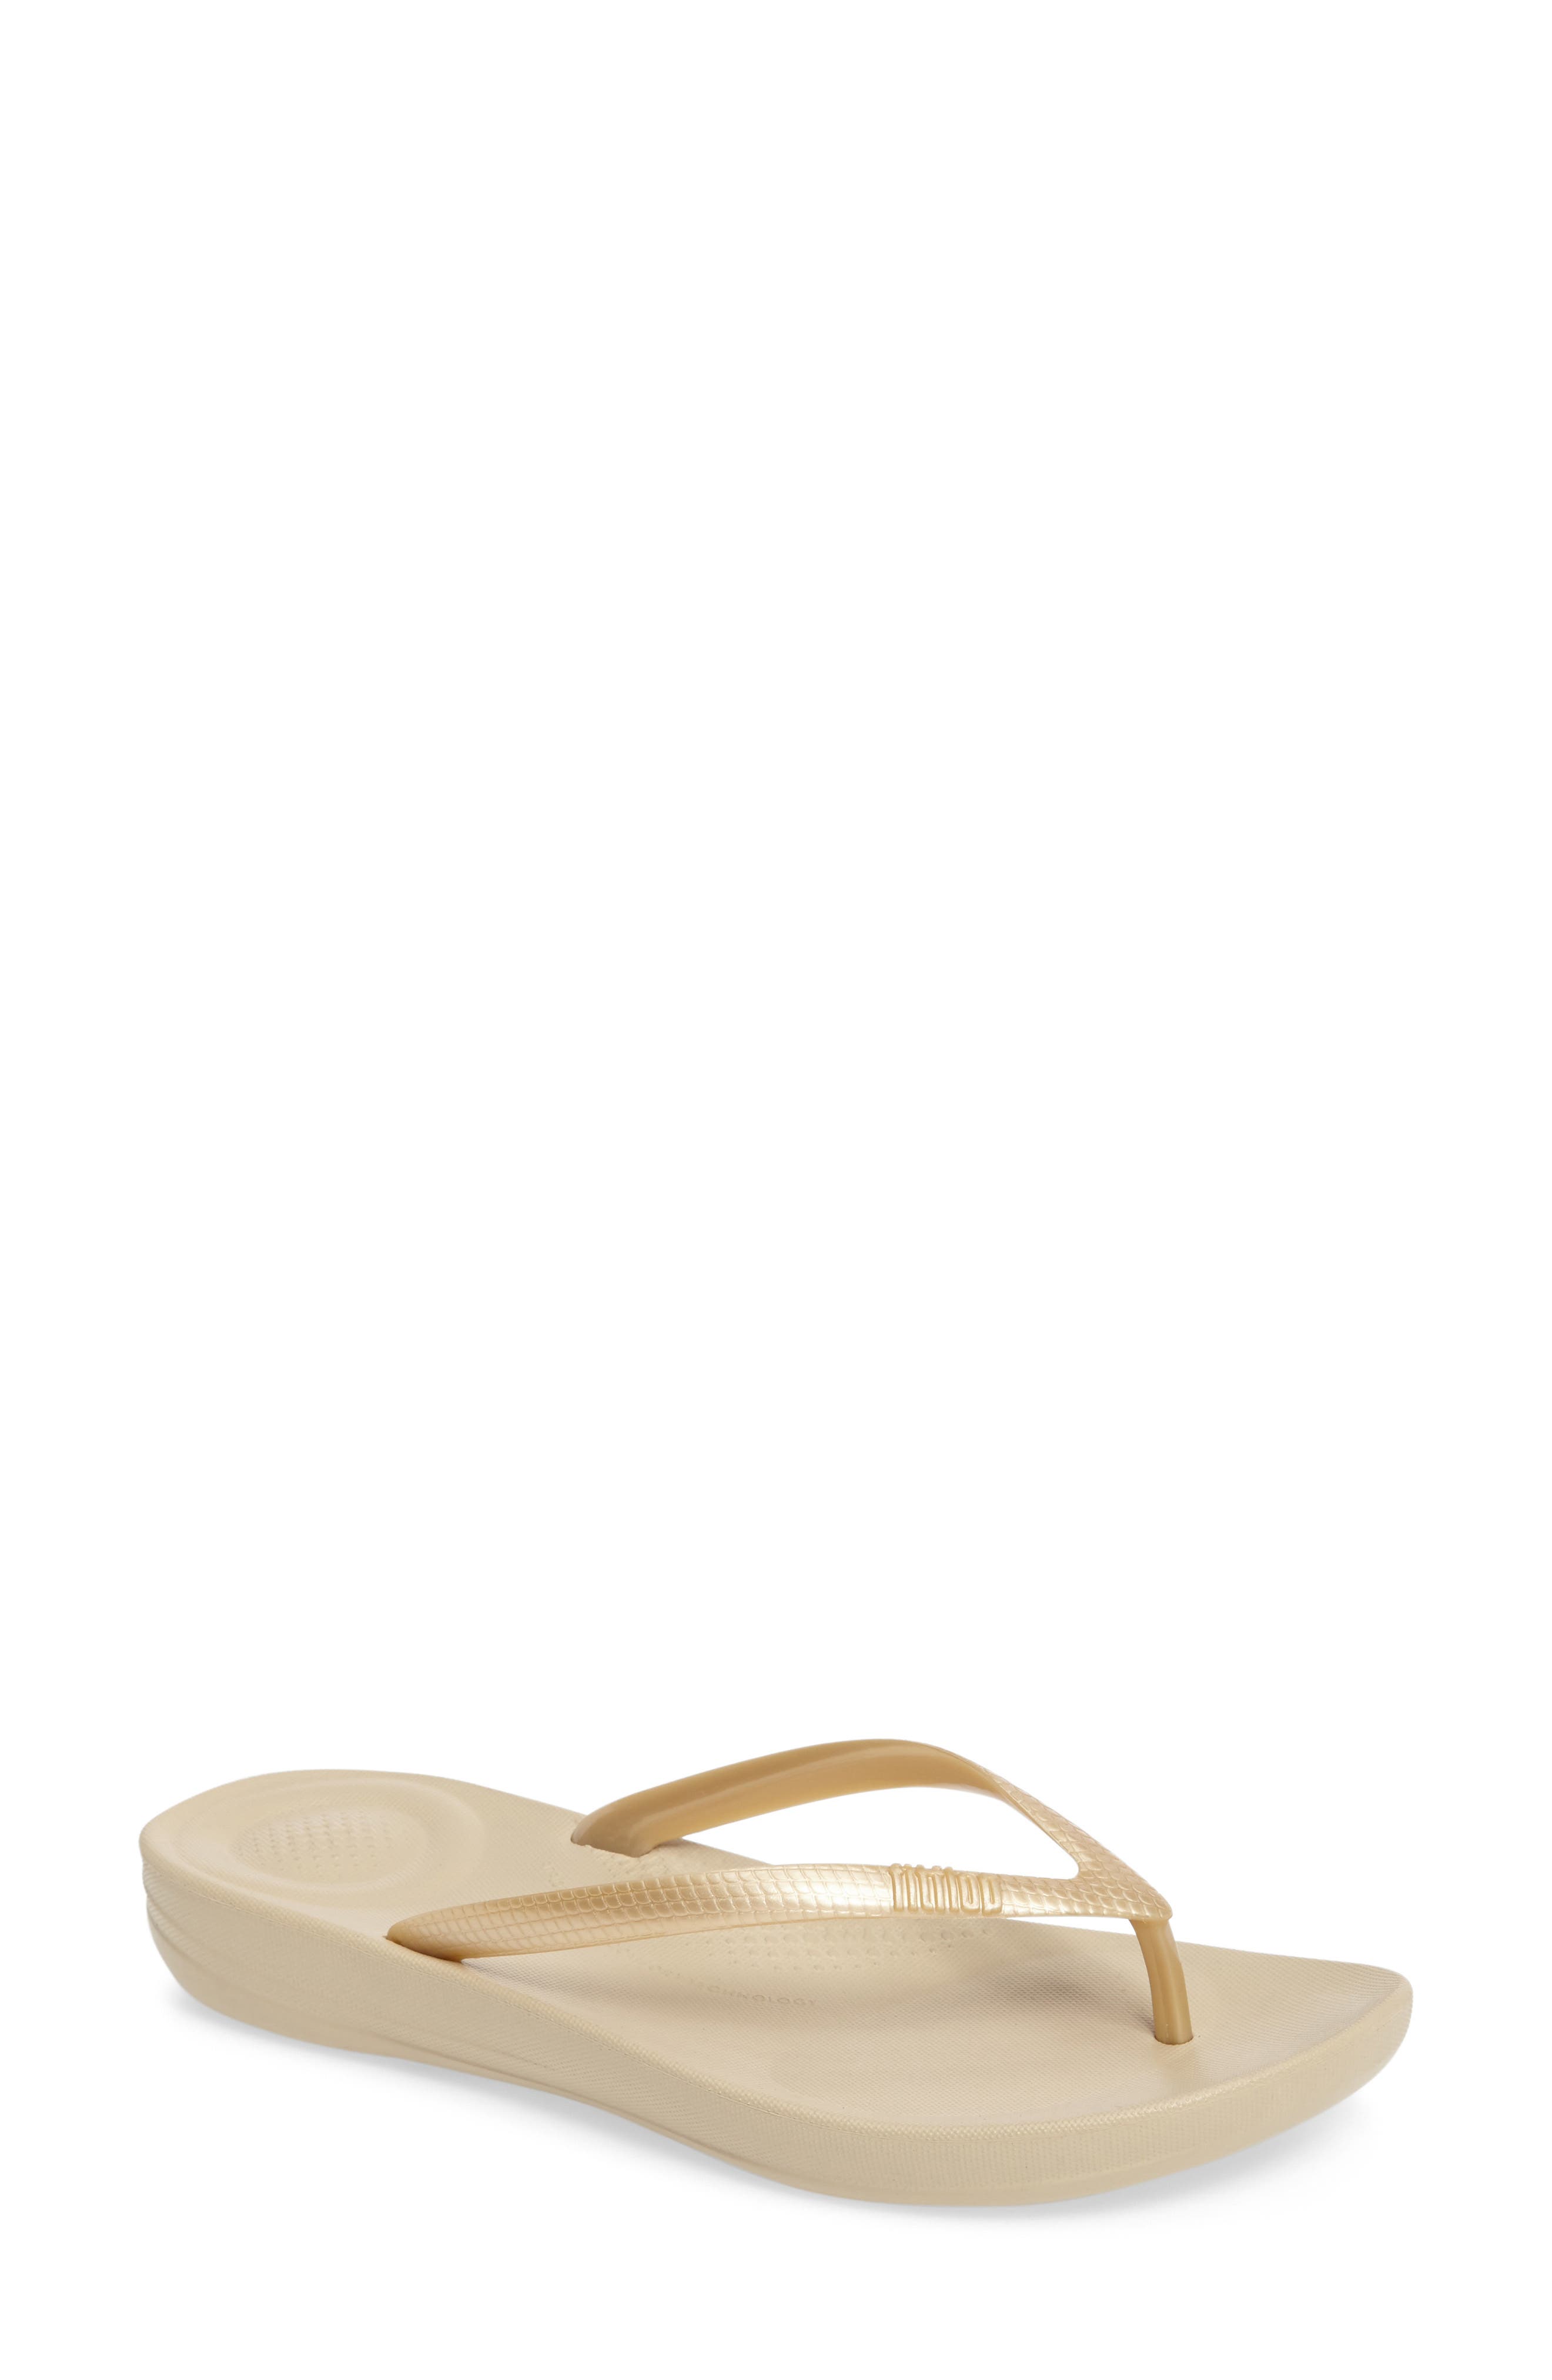 fitflop sneakers nordstrom